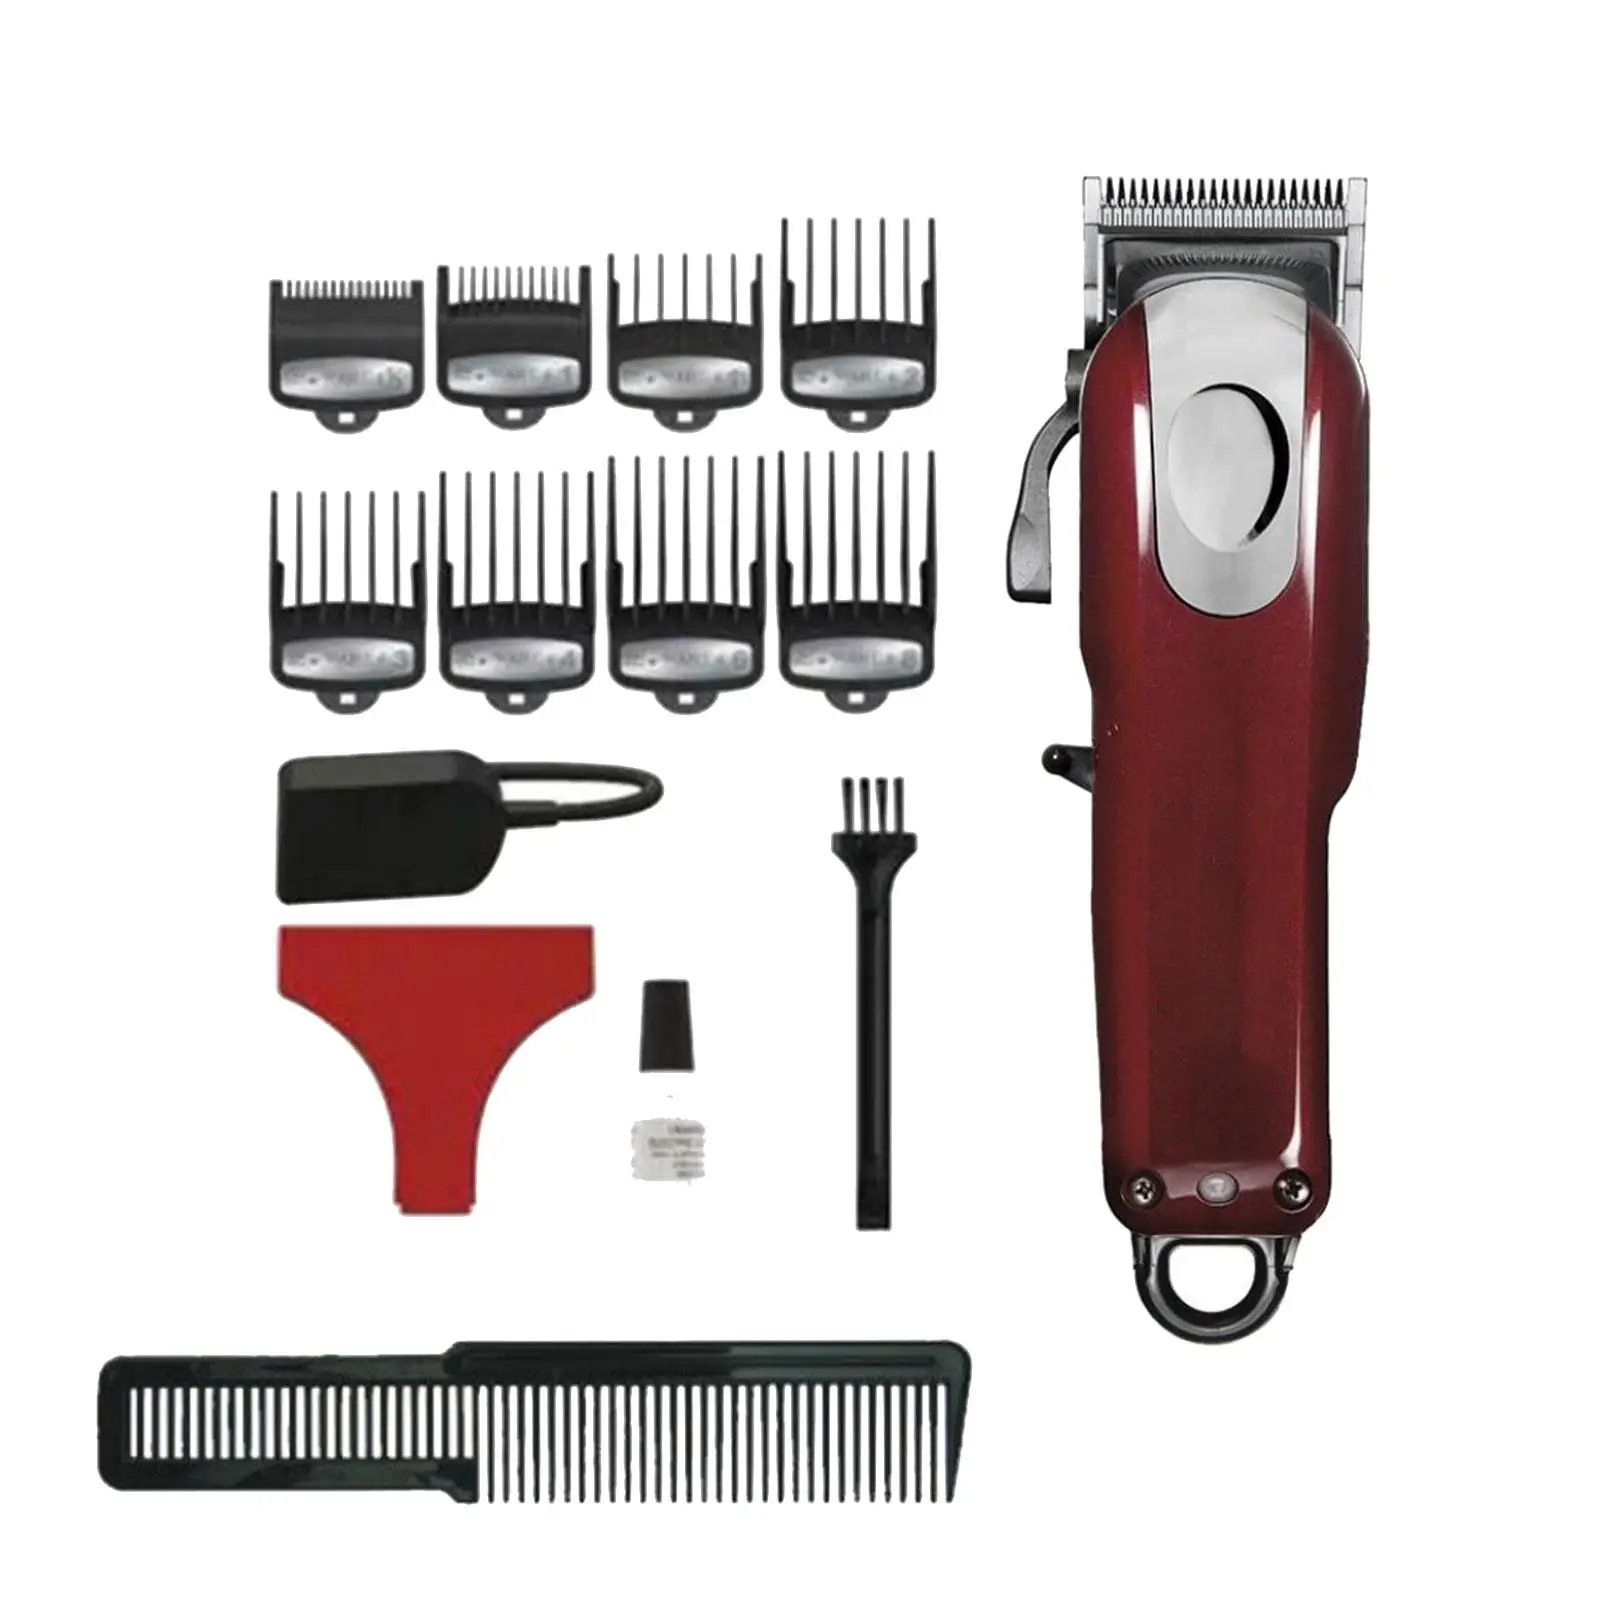 Hair Trimmer Set 8148 Barber Clipper EU Power Adapter for Stylists with Oil, Cutting Guides, Styling Comb Powerful Grooming